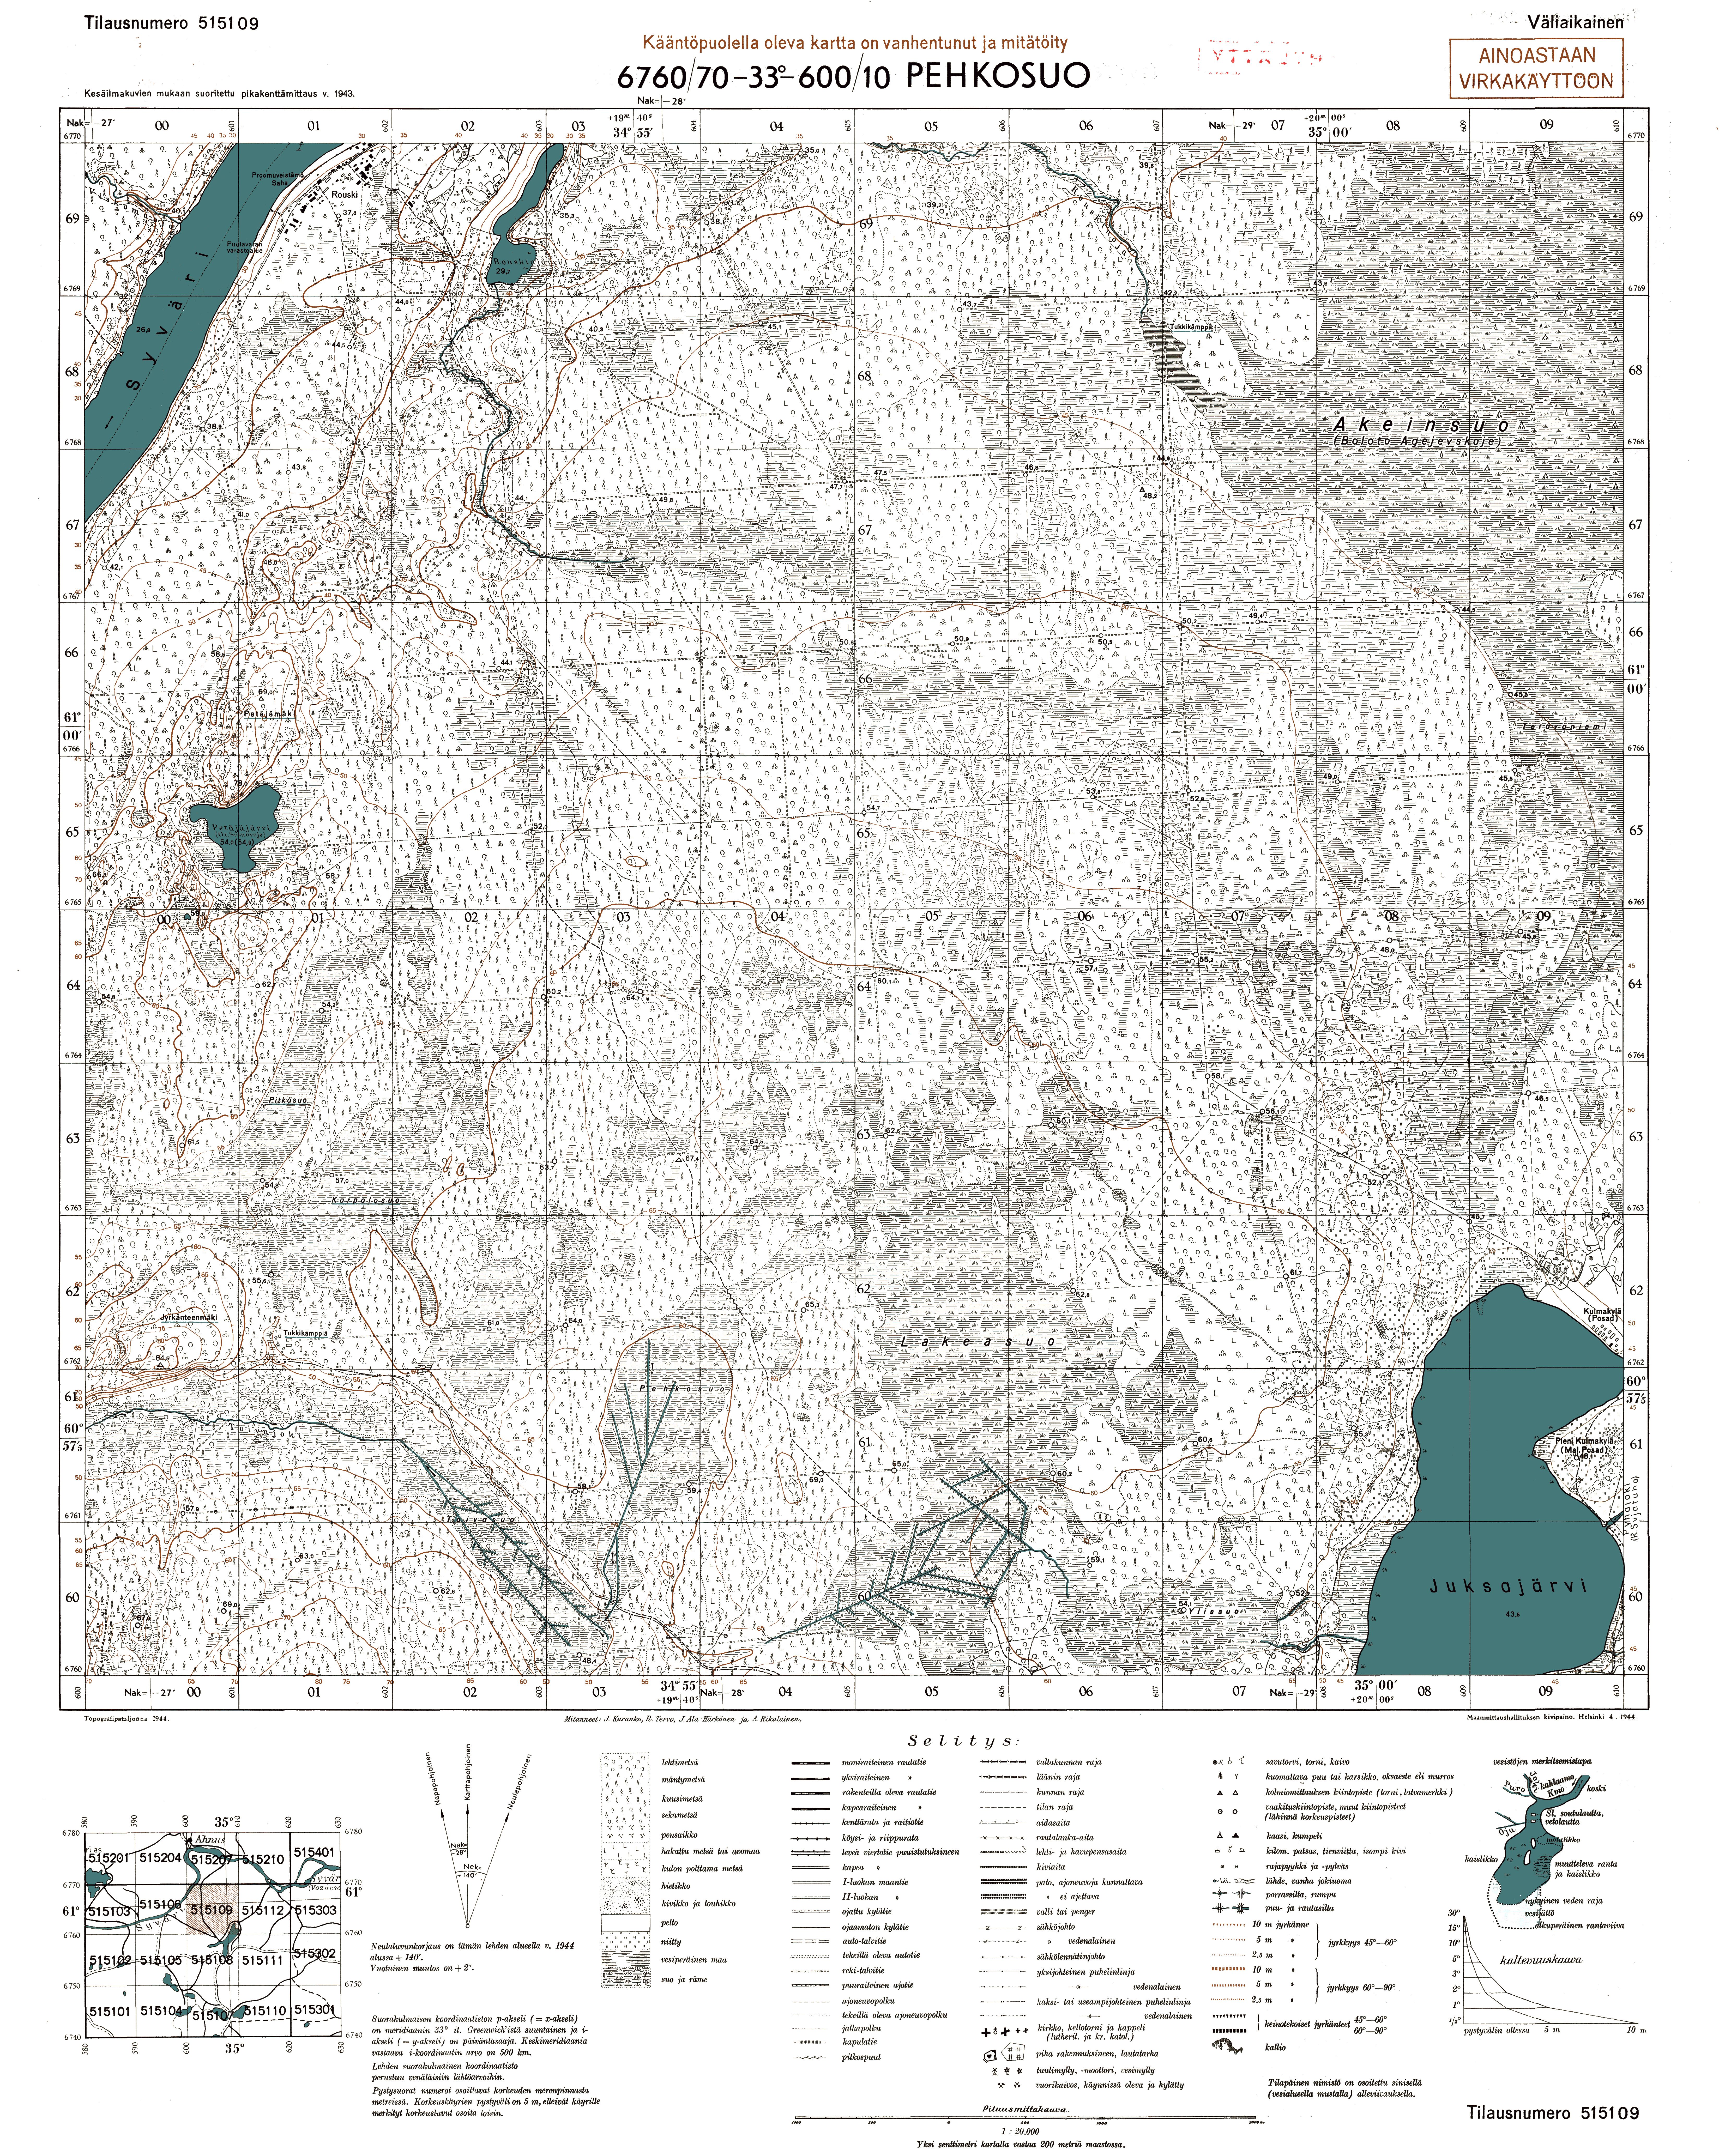 Pehkboloto Marshes. Pehkosuo. Topografikartta 515109. Topographic map from 1944. Use the zooming tool to explore in higher level of detail. Obtain as a quality print or high resolution image